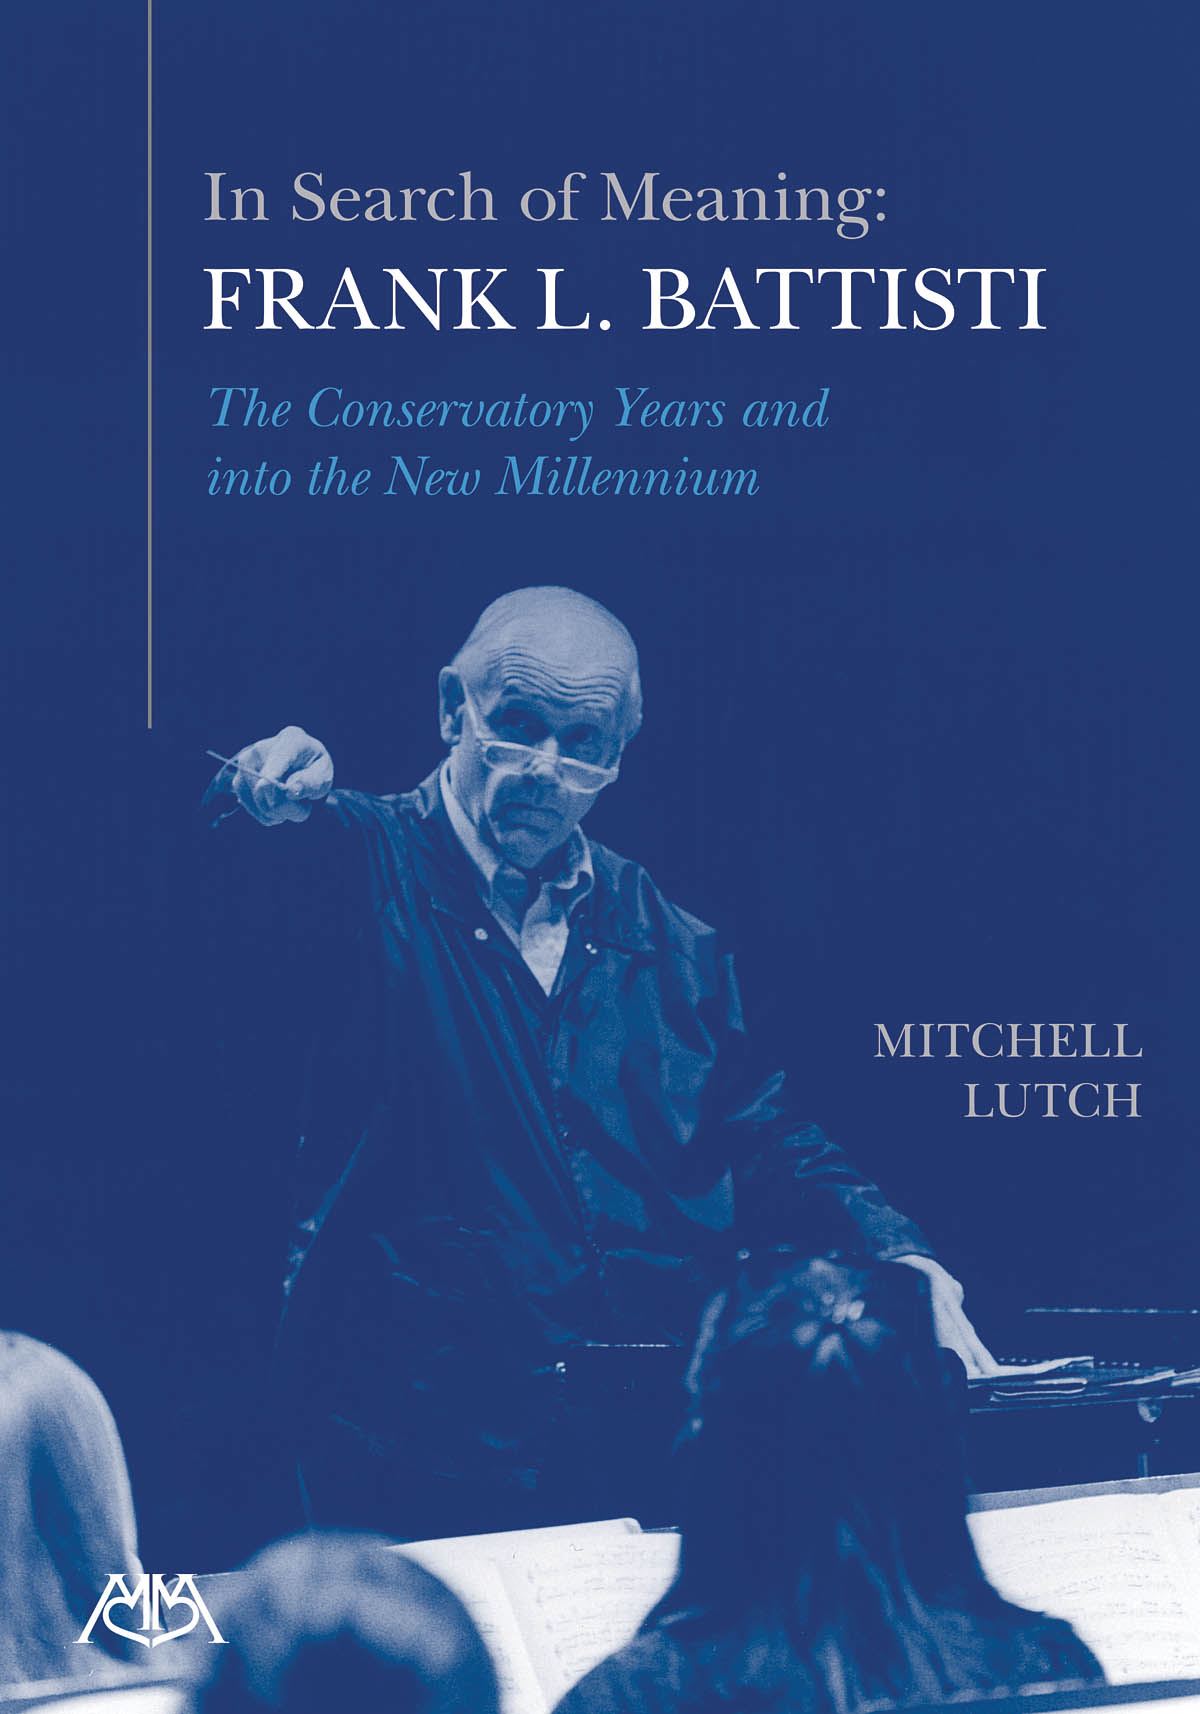 In Search of Meaning - Frank L. Battisti: Reference Books: Biography